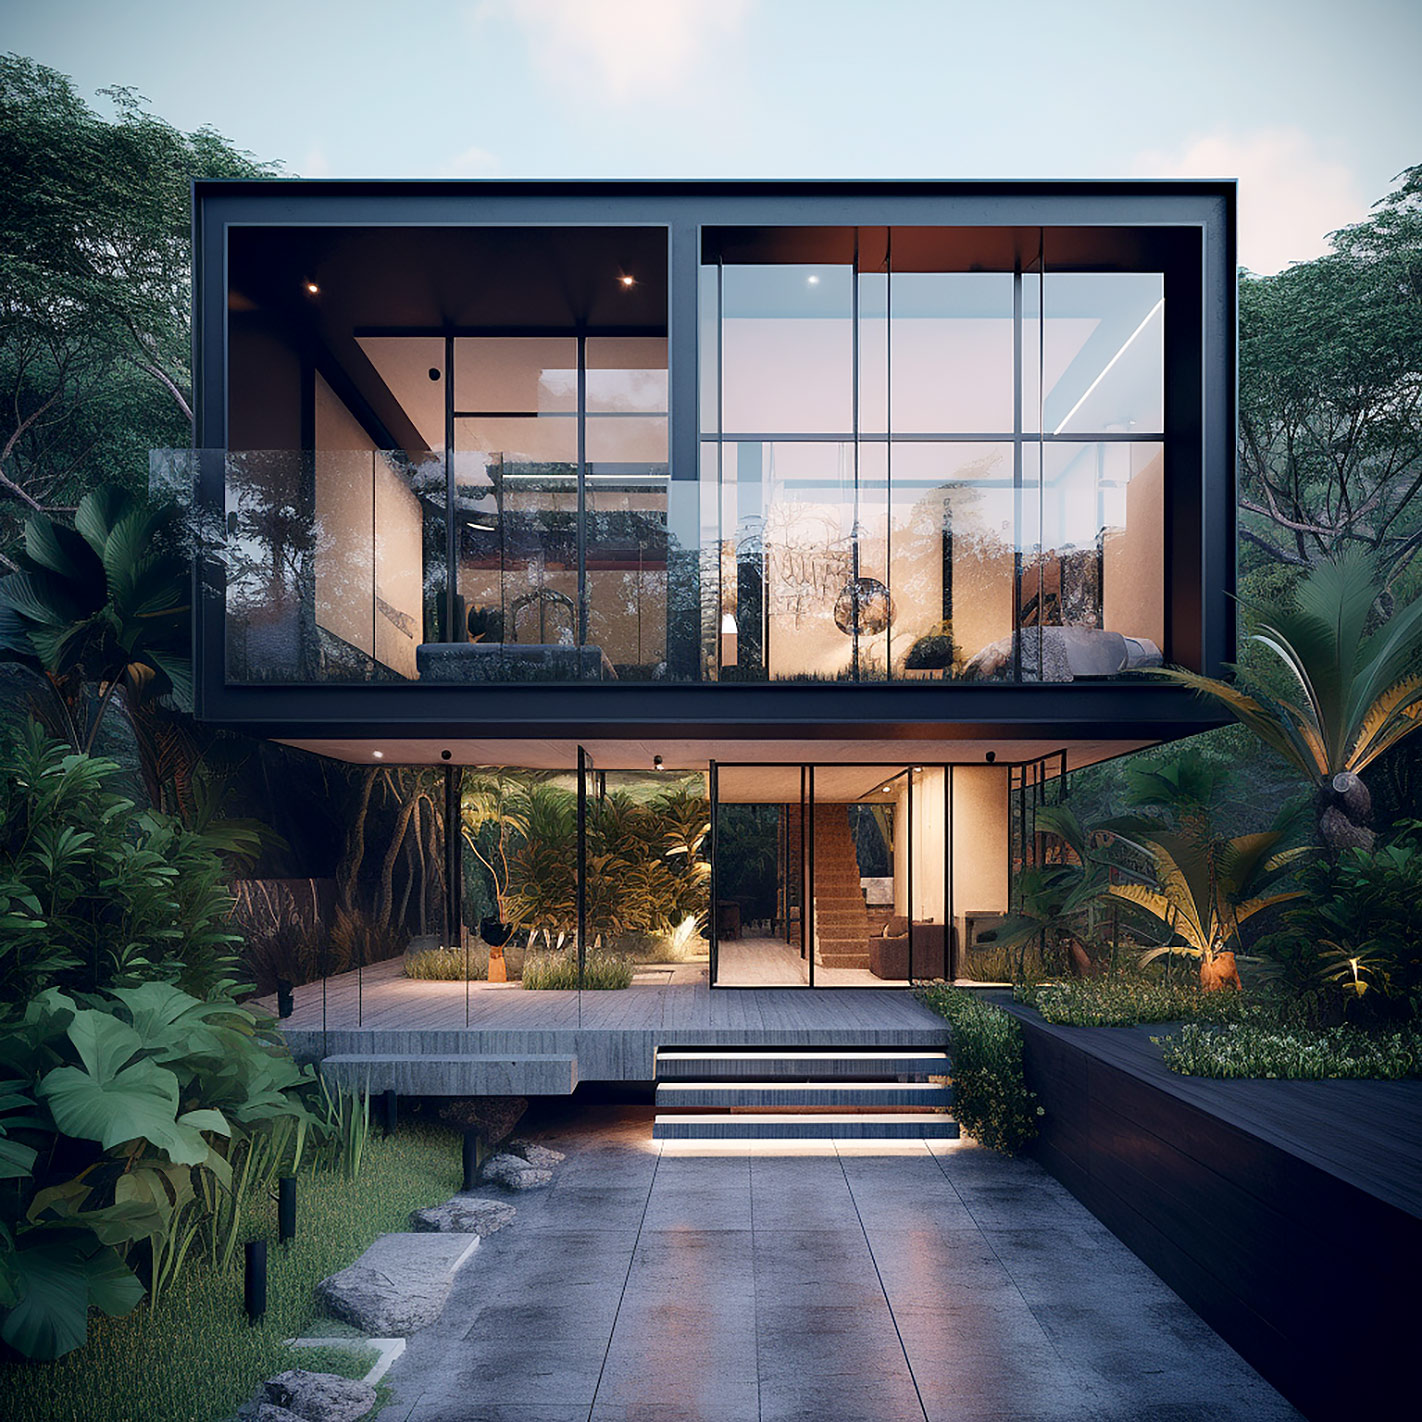 mbest_ultra_modern_house_with_glass_doors_in_Indonesiadwell_mag_06b2f552-3c61-4829-9f5d-d8d17178d3ab